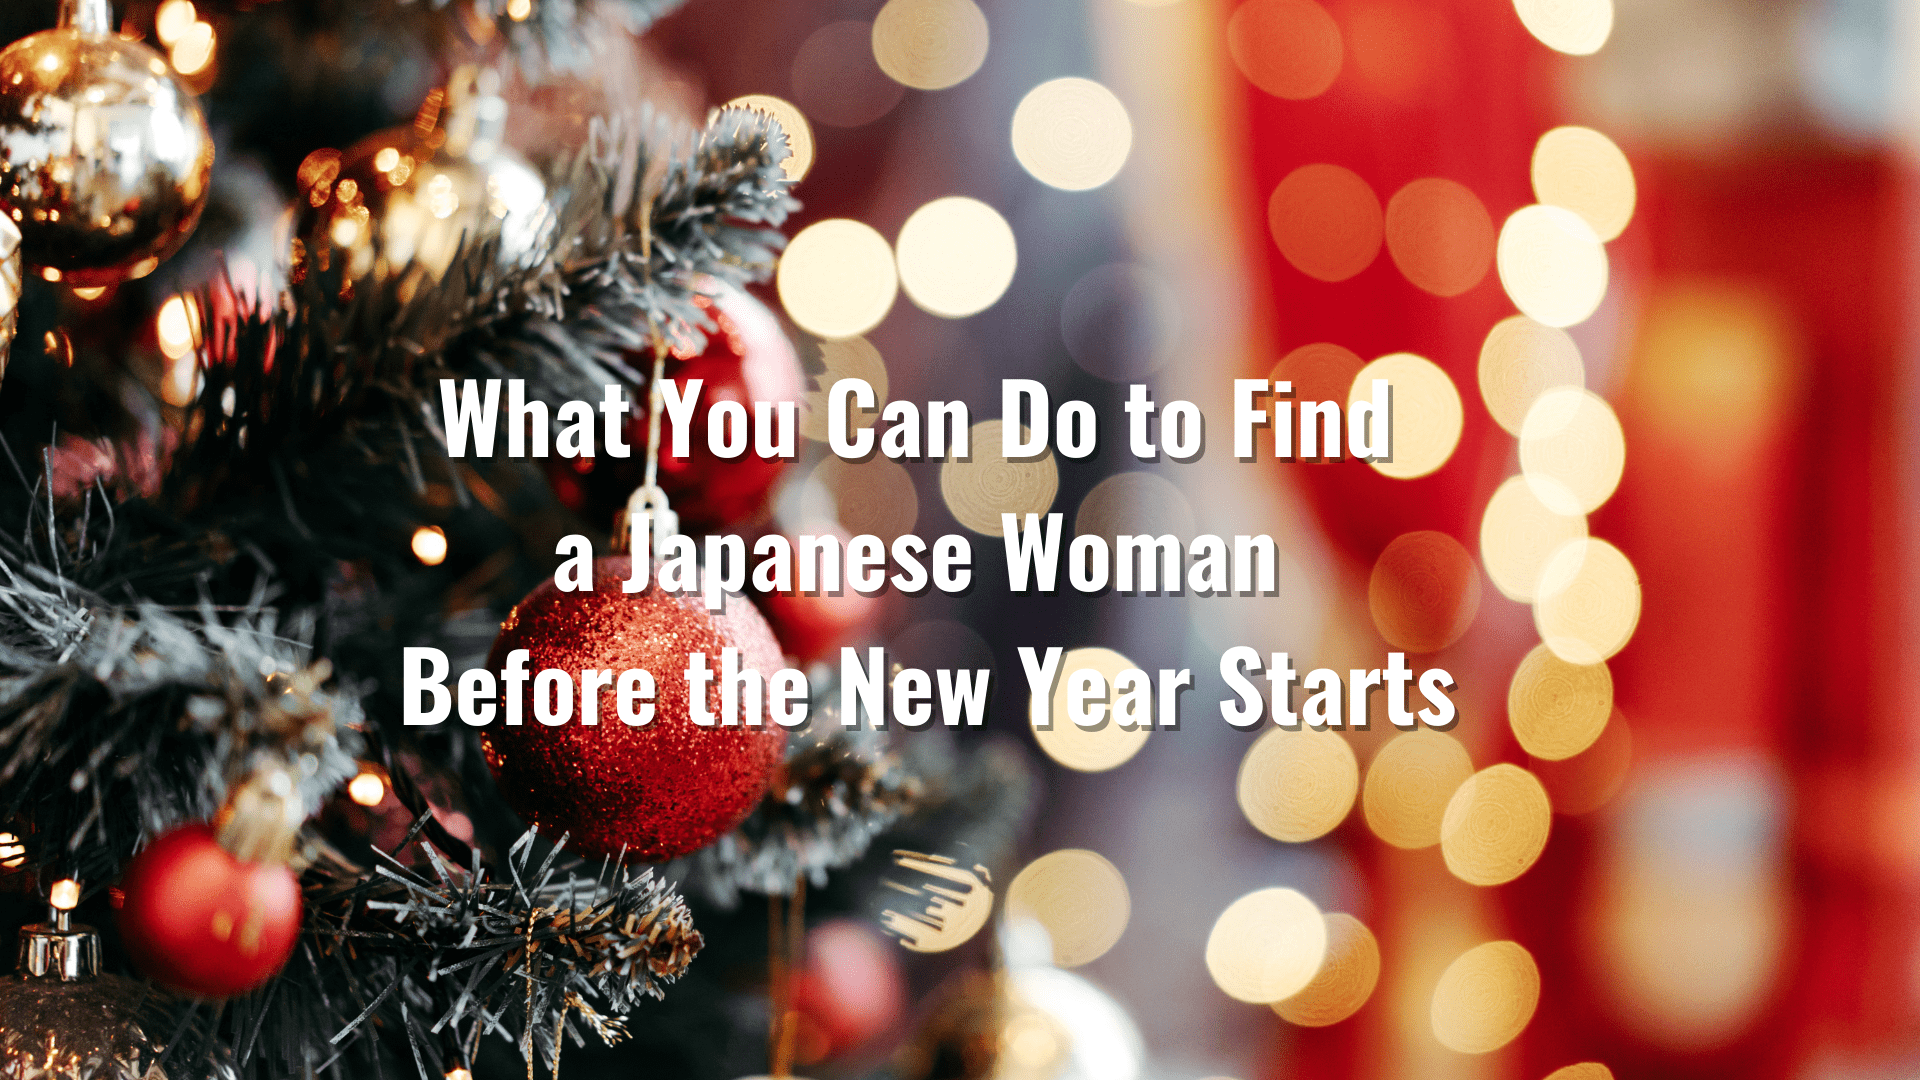 Find a Japanese Woman before New Year